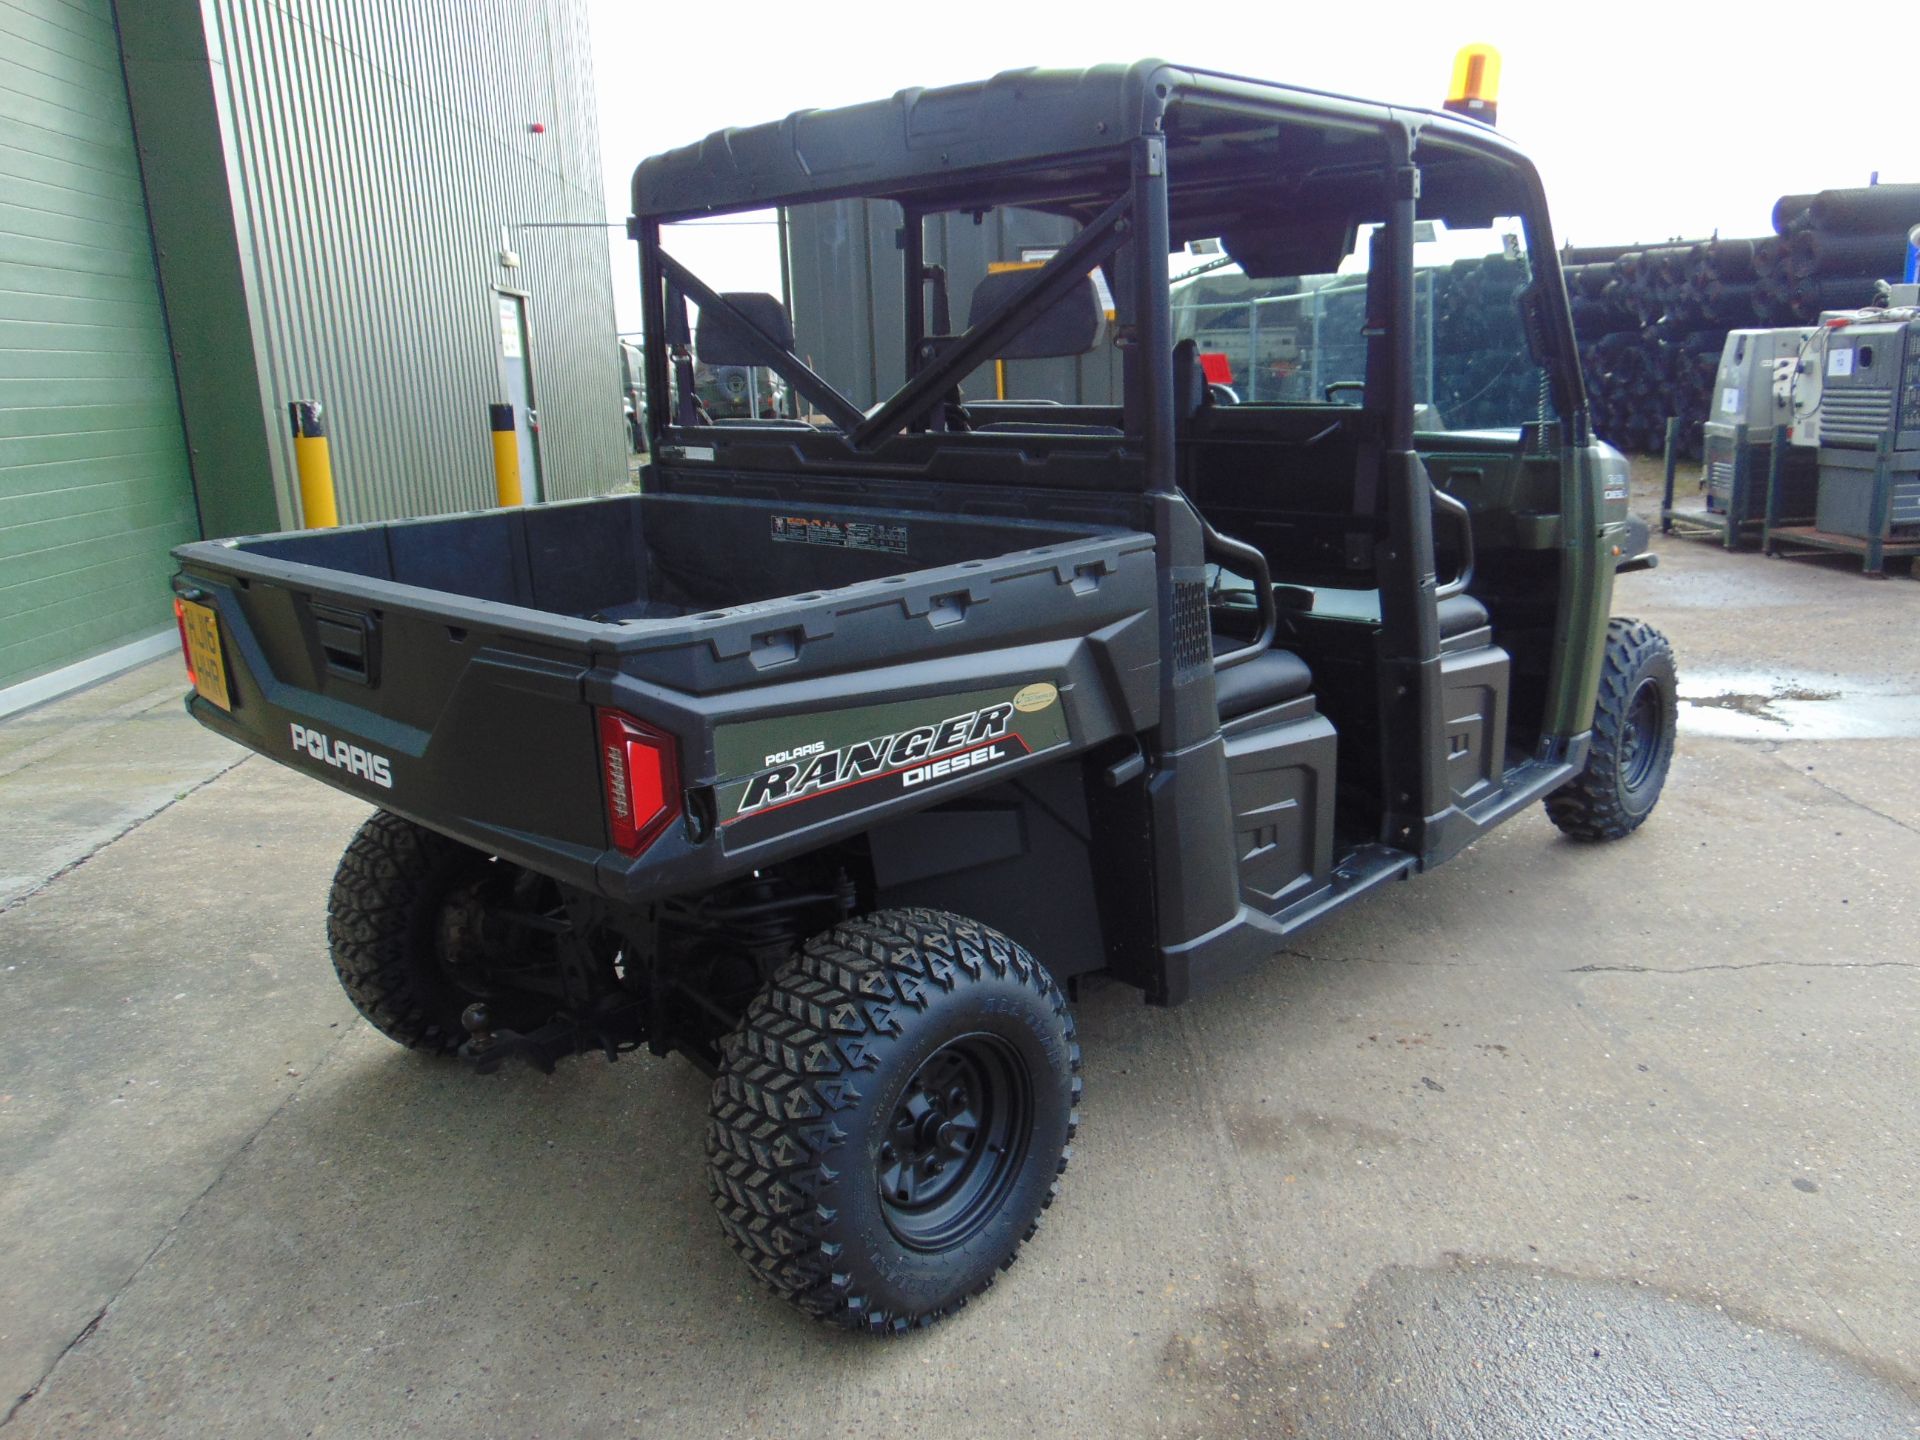 Polaris Ranger Crew Cab Diesel Utility Vehicle 1,190 Hrs only from Govt Dept - Image 7 of 25